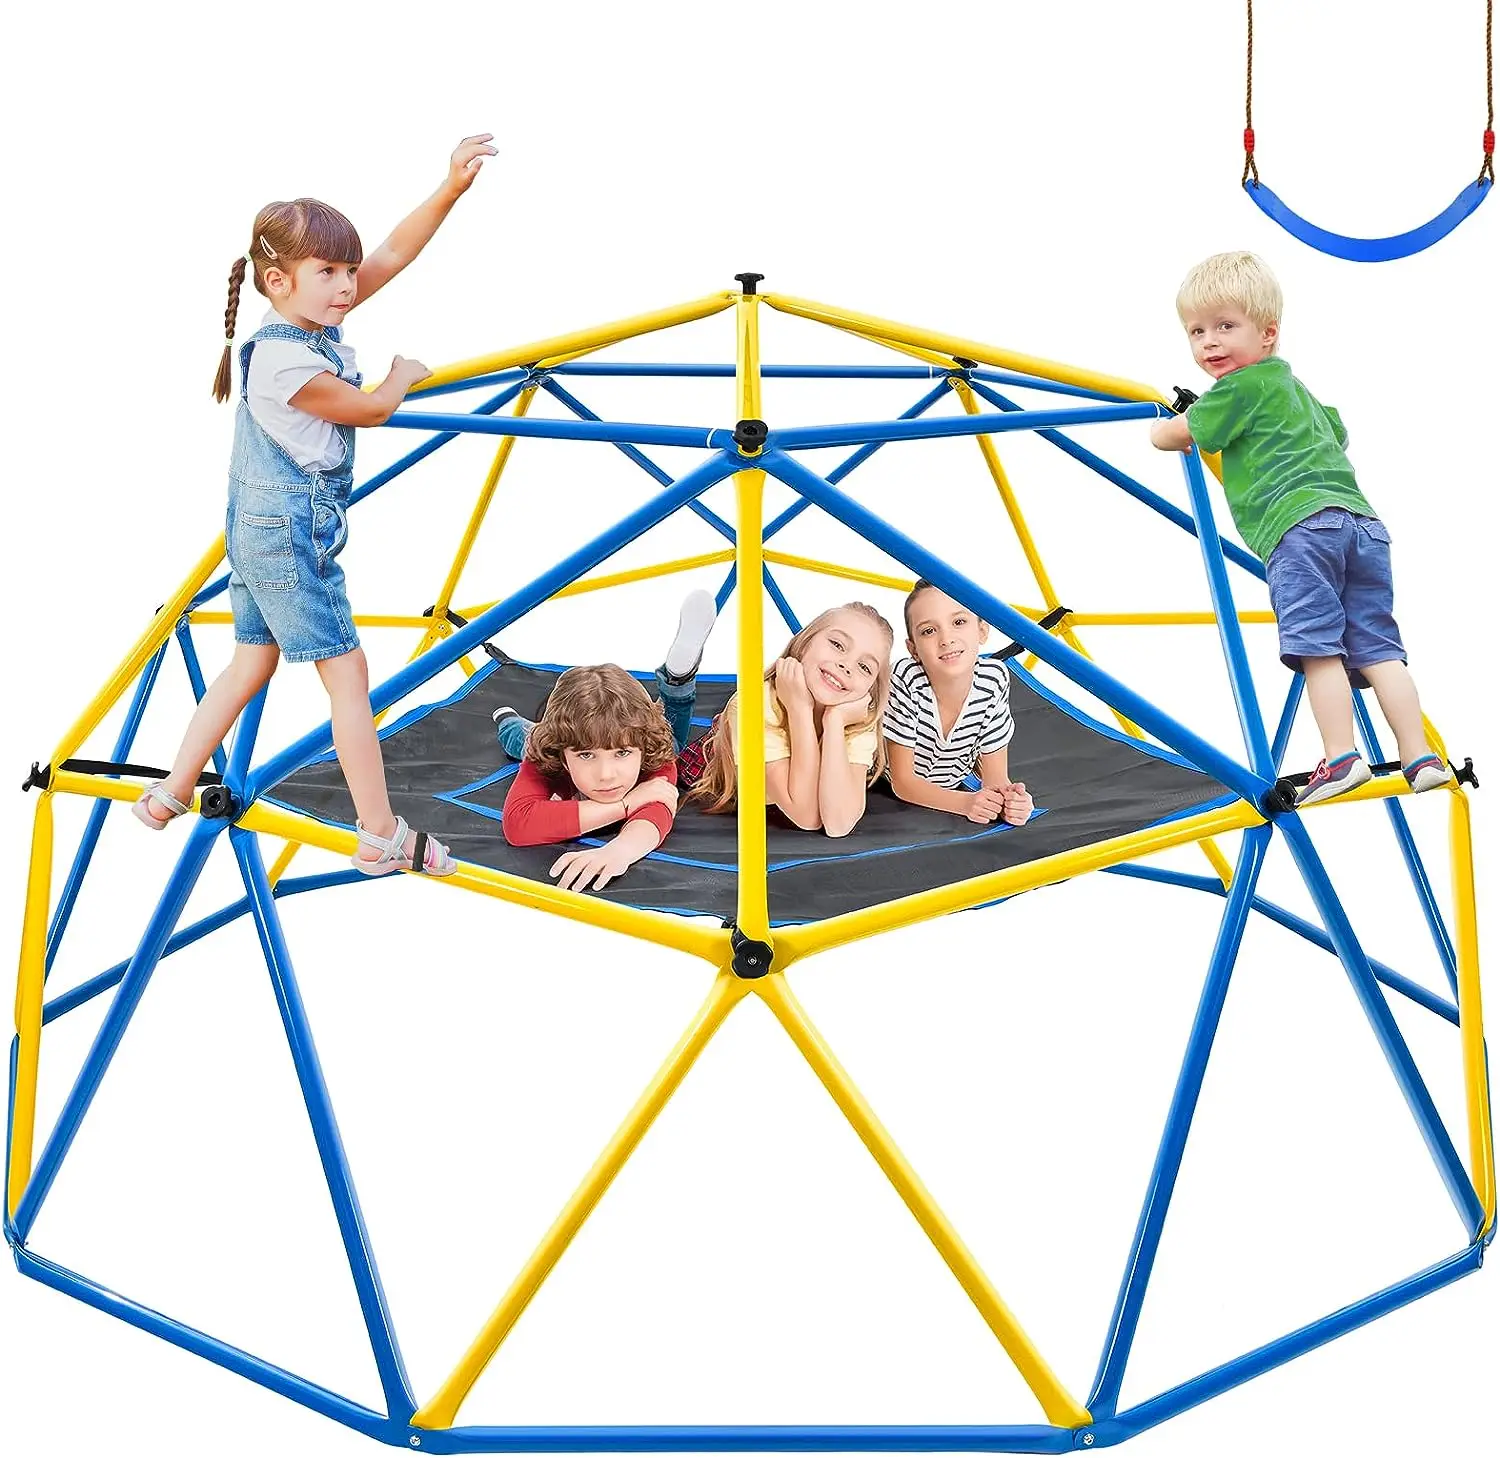 

Upgraded 10FT Climbing Dome with and Swing, Dome Climber for Kids 3 - 10, Weight Capability 800LBS, 3-Year Warranty, Rust and U